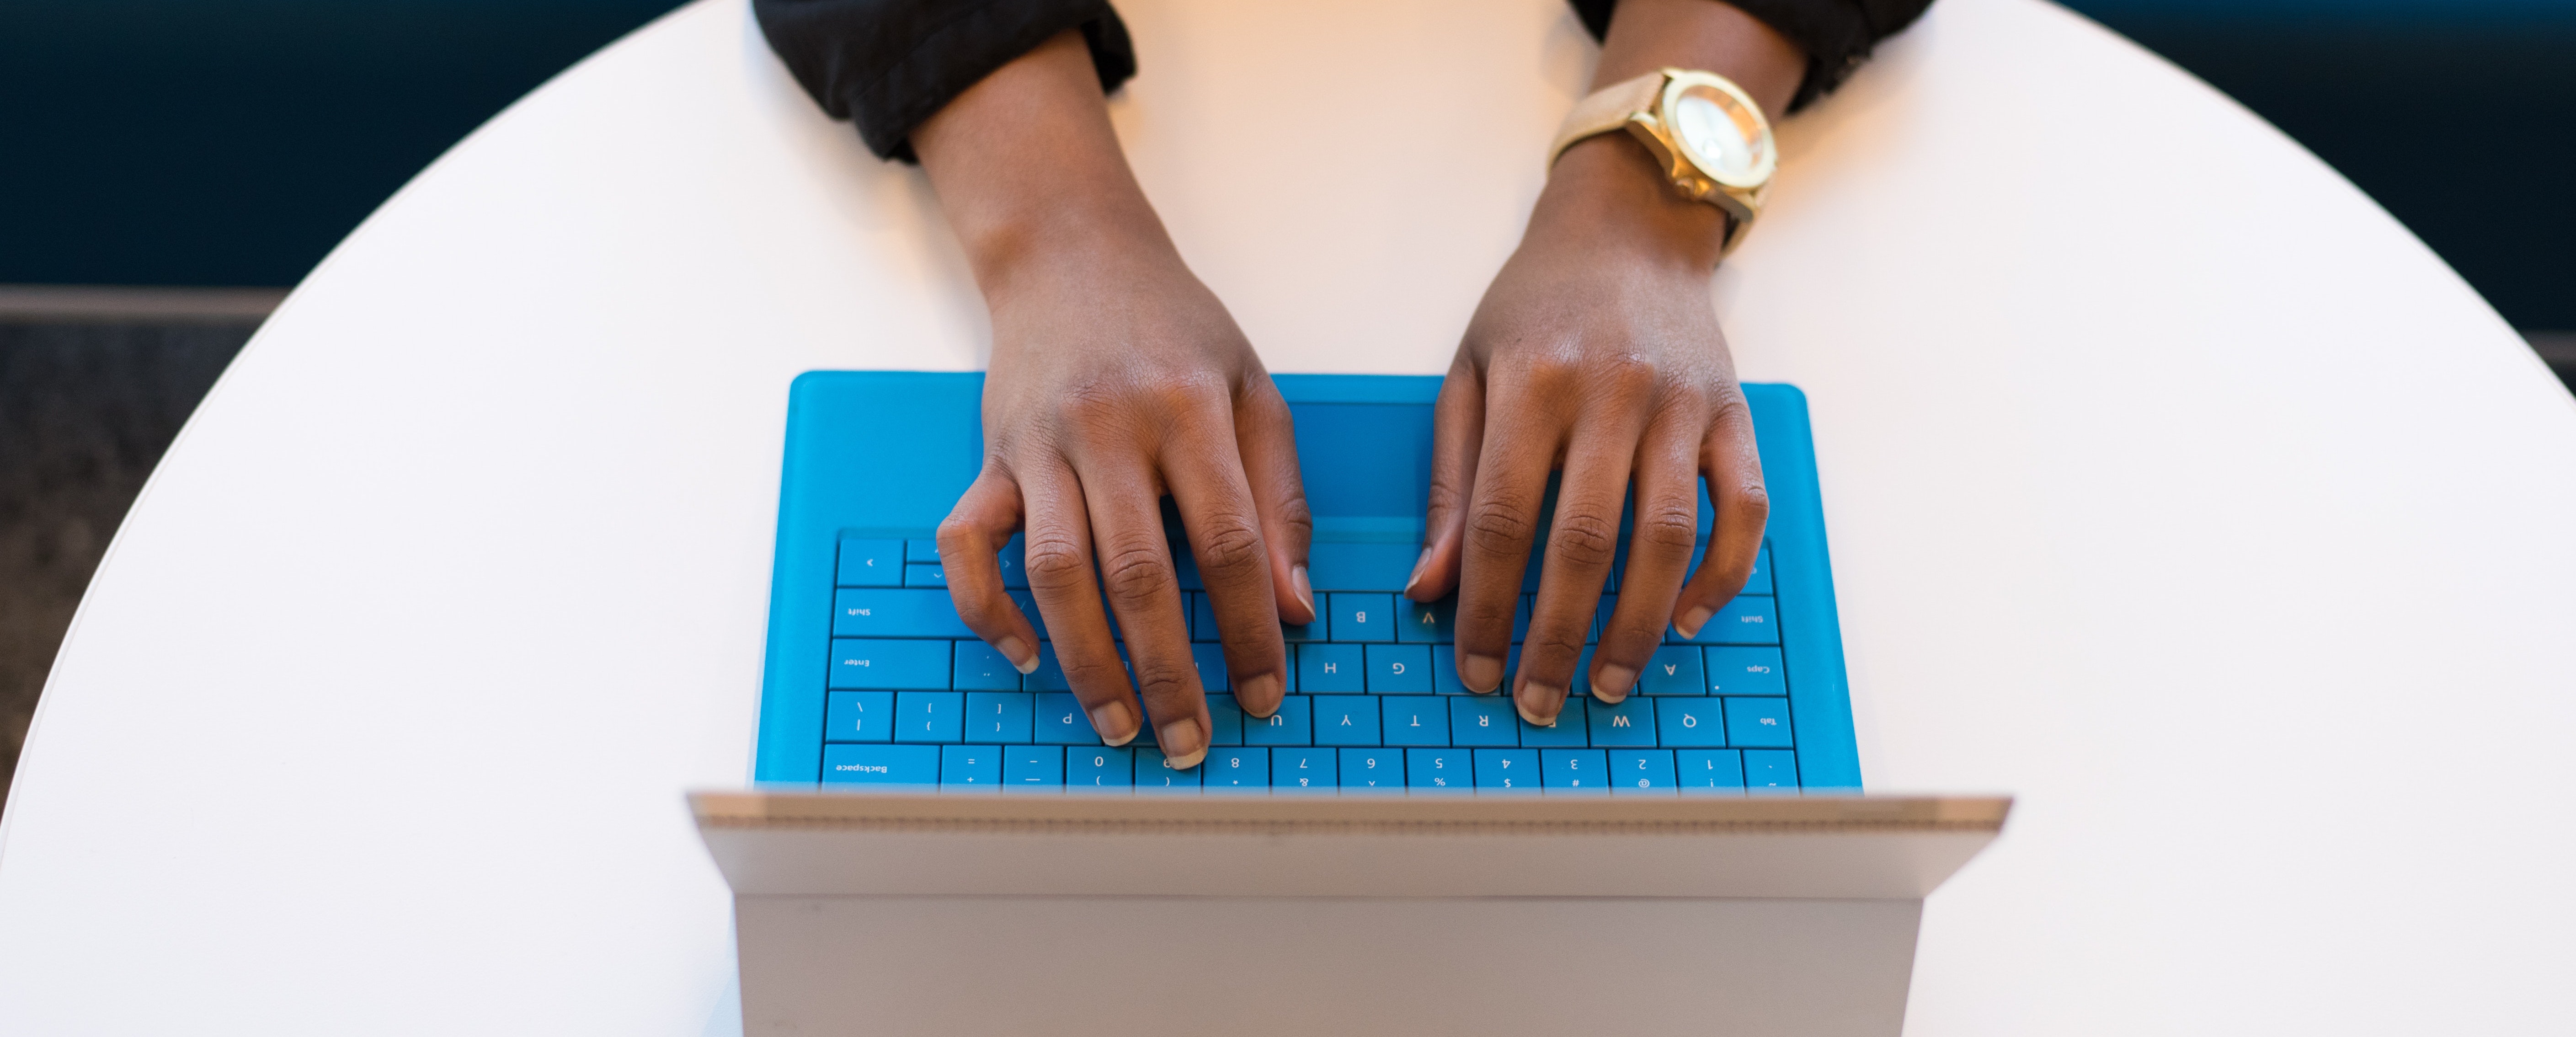 Person typing on blue laptop or tablet keyboard